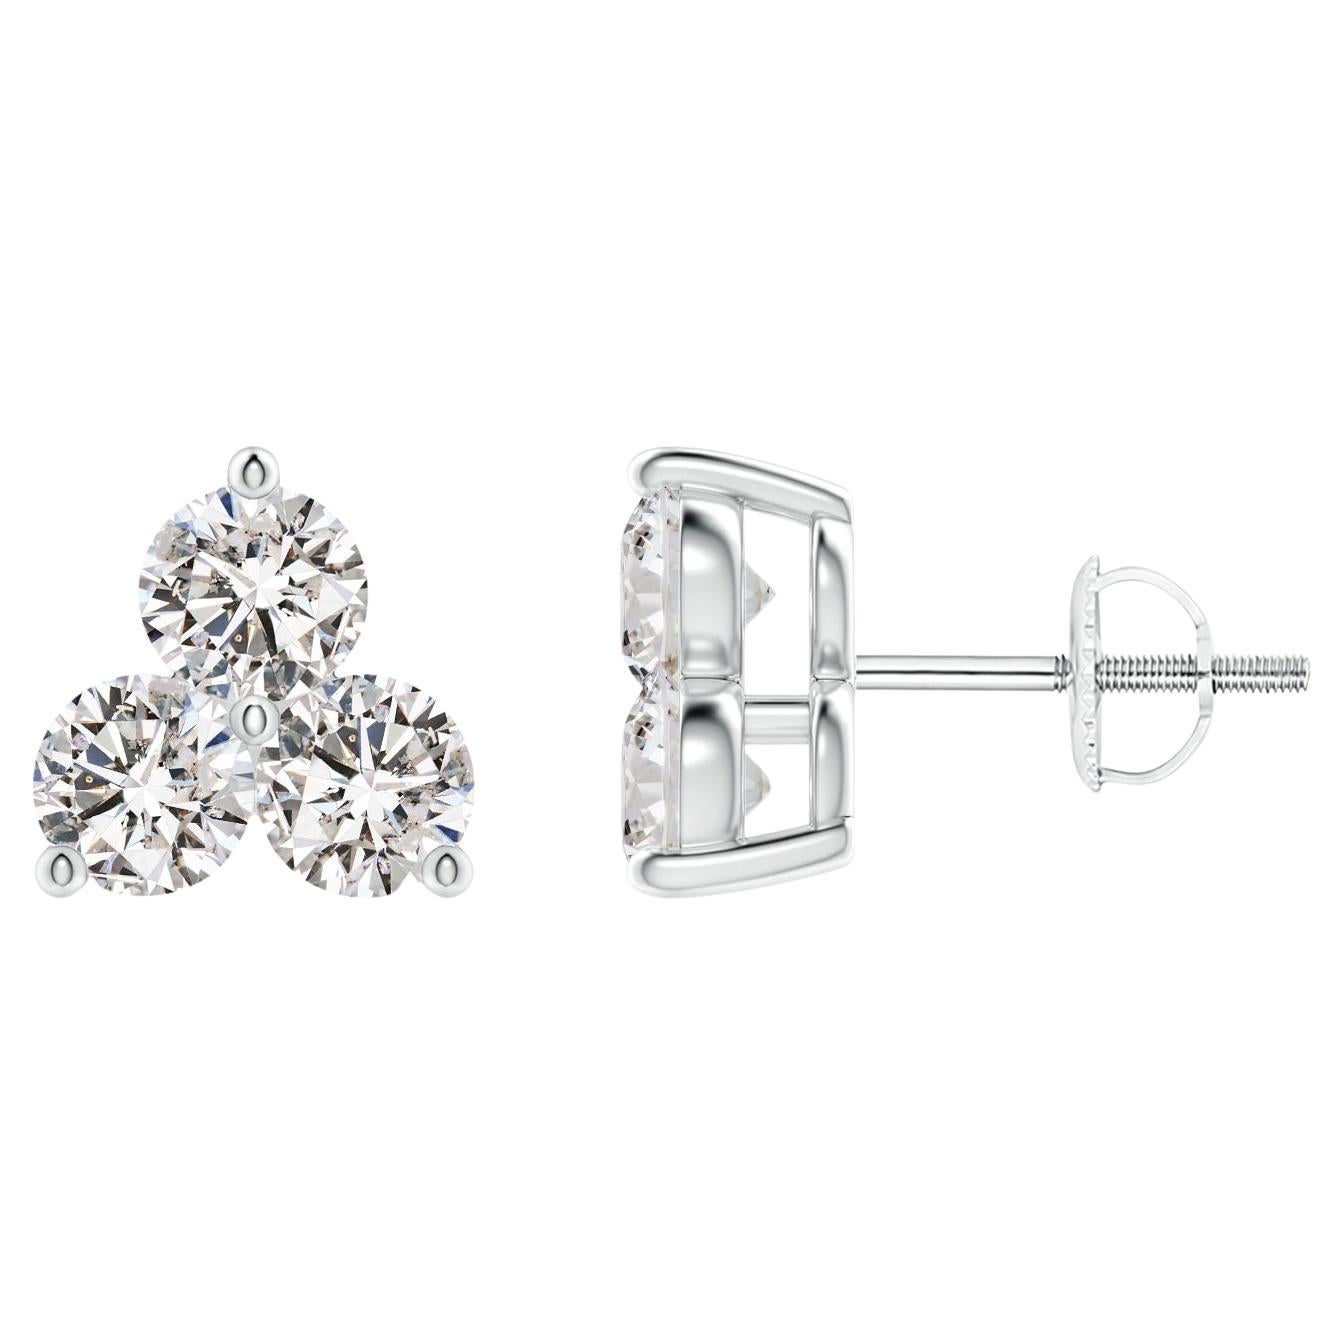 Natural Diamond Stud Earrings in 14K White Gold (1cttw  Color-I-J  Clarity-I1I2) For Sale